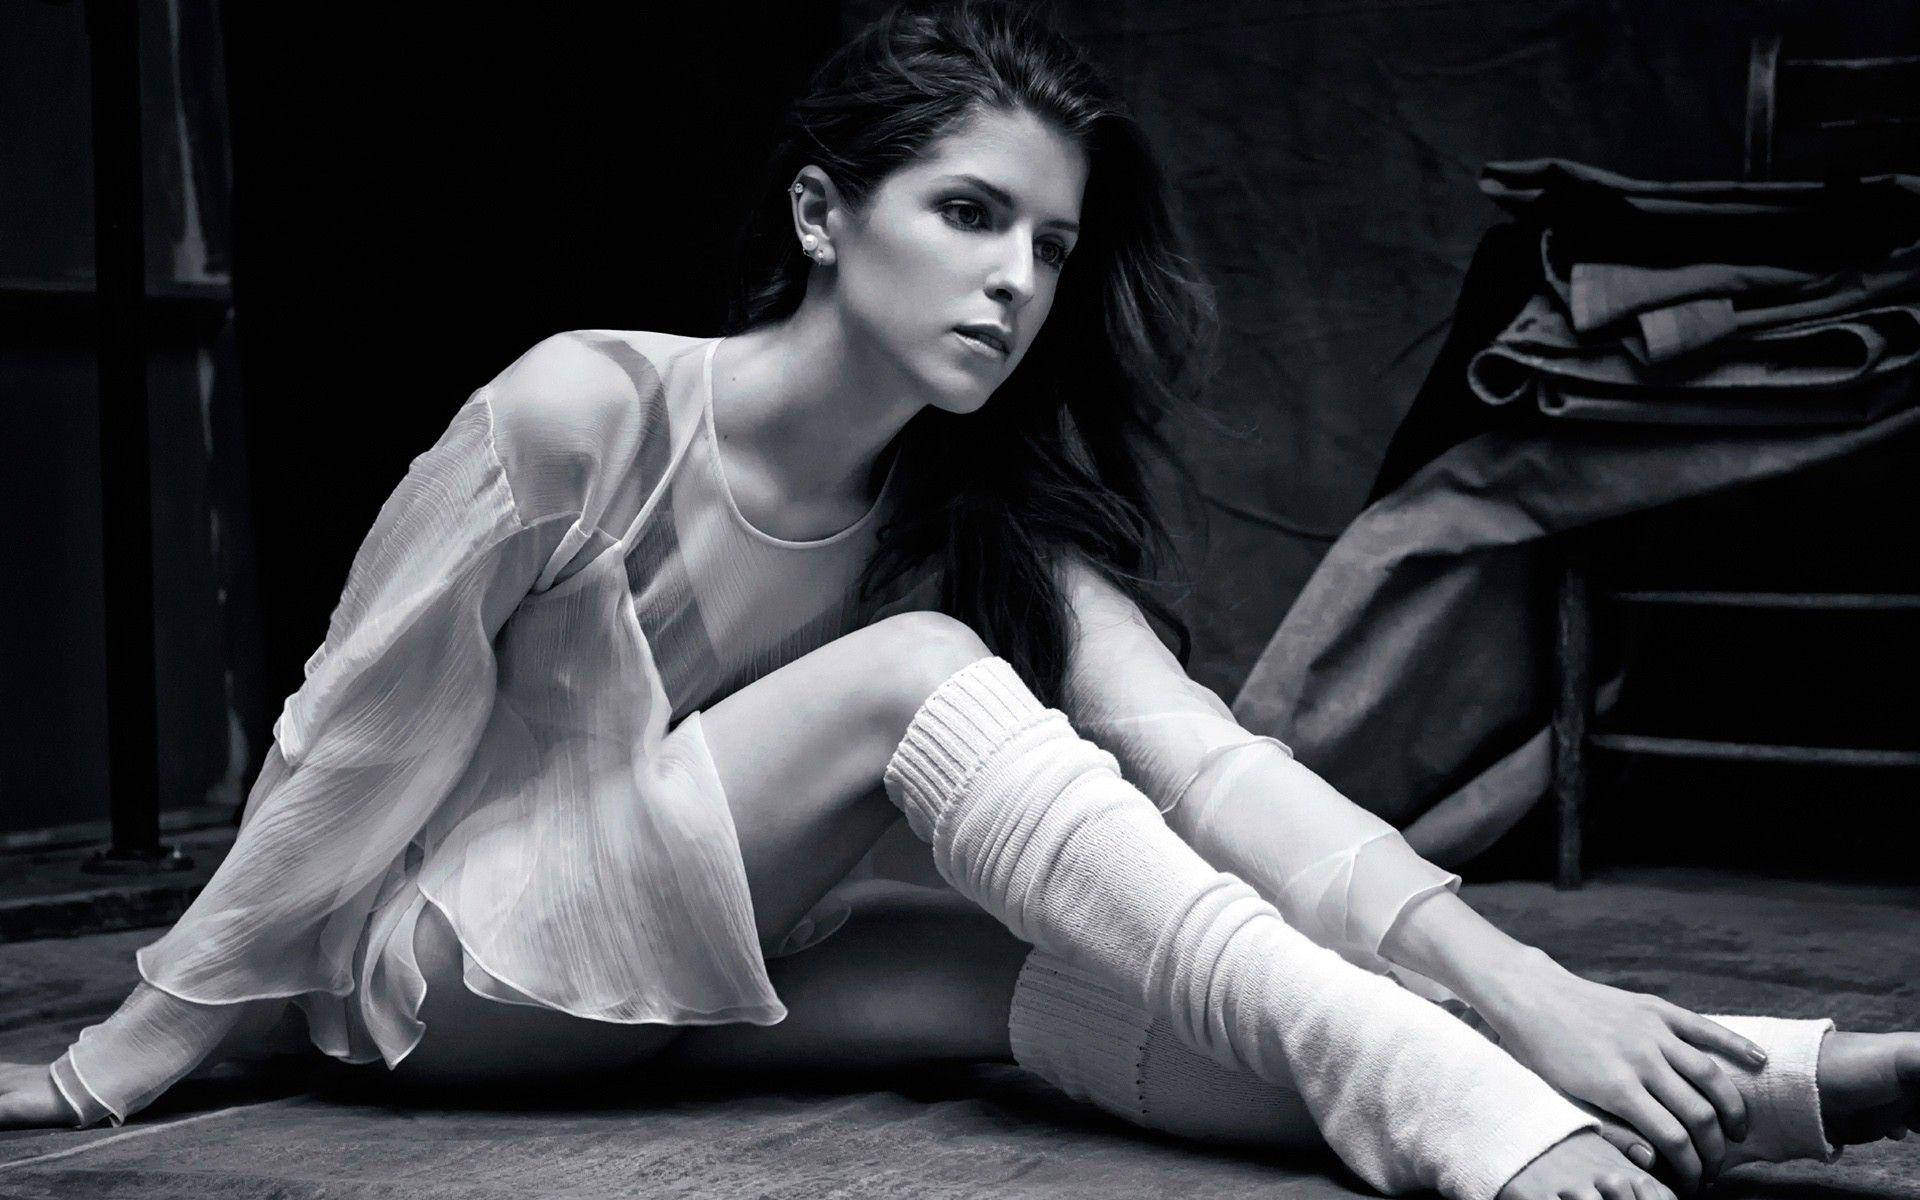 Caption: Anna Kendrick Stunning In Photoshoot For The Edit Magazine Background